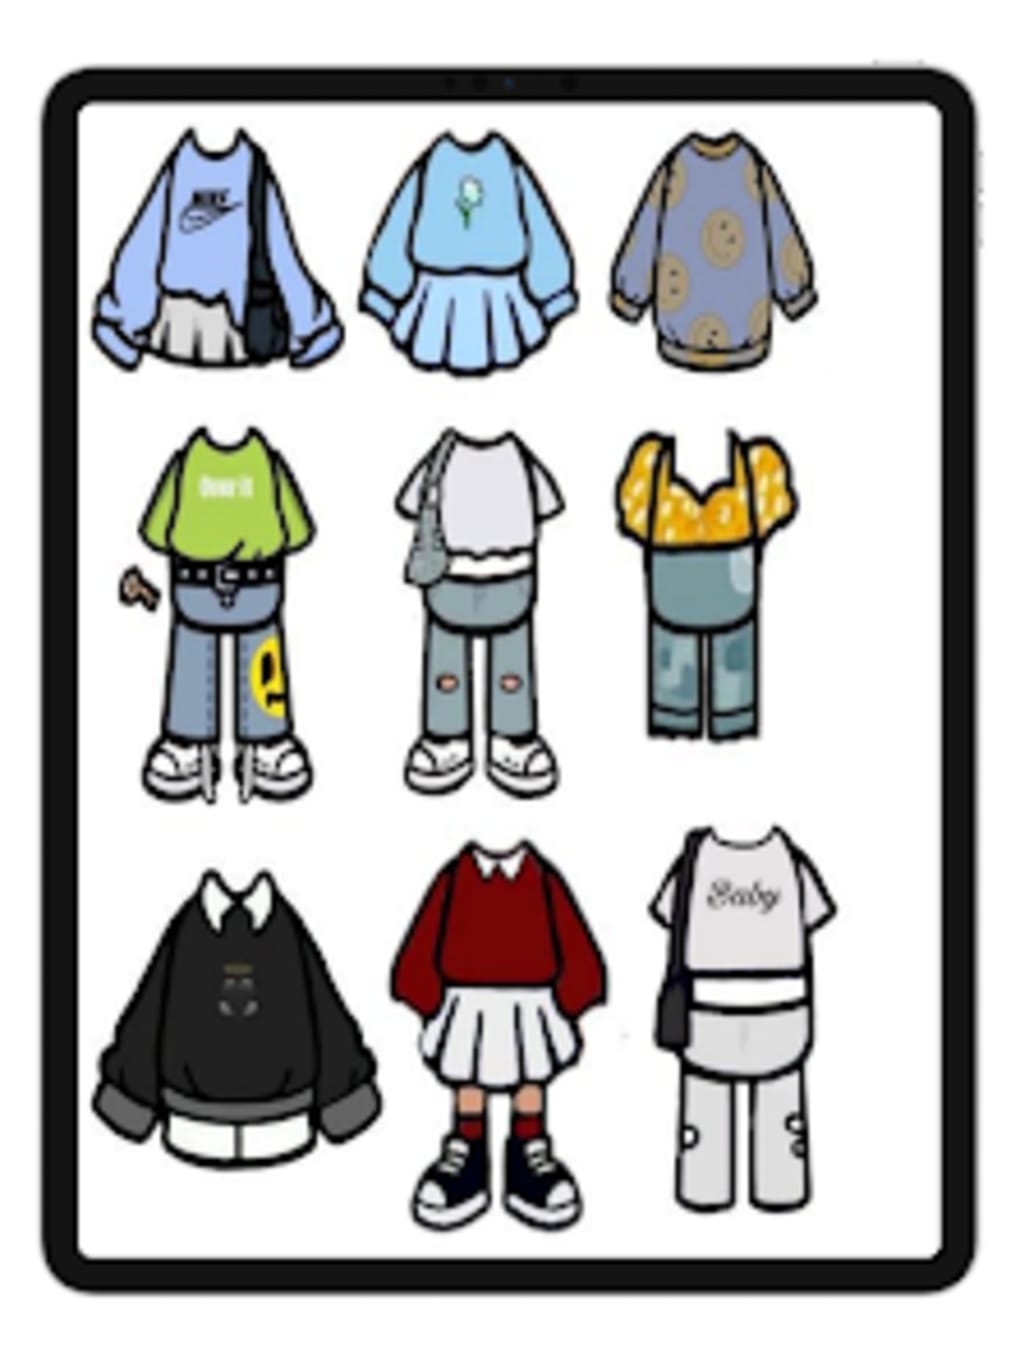 Download Toca Boca Paper Doll Ideas android on PC